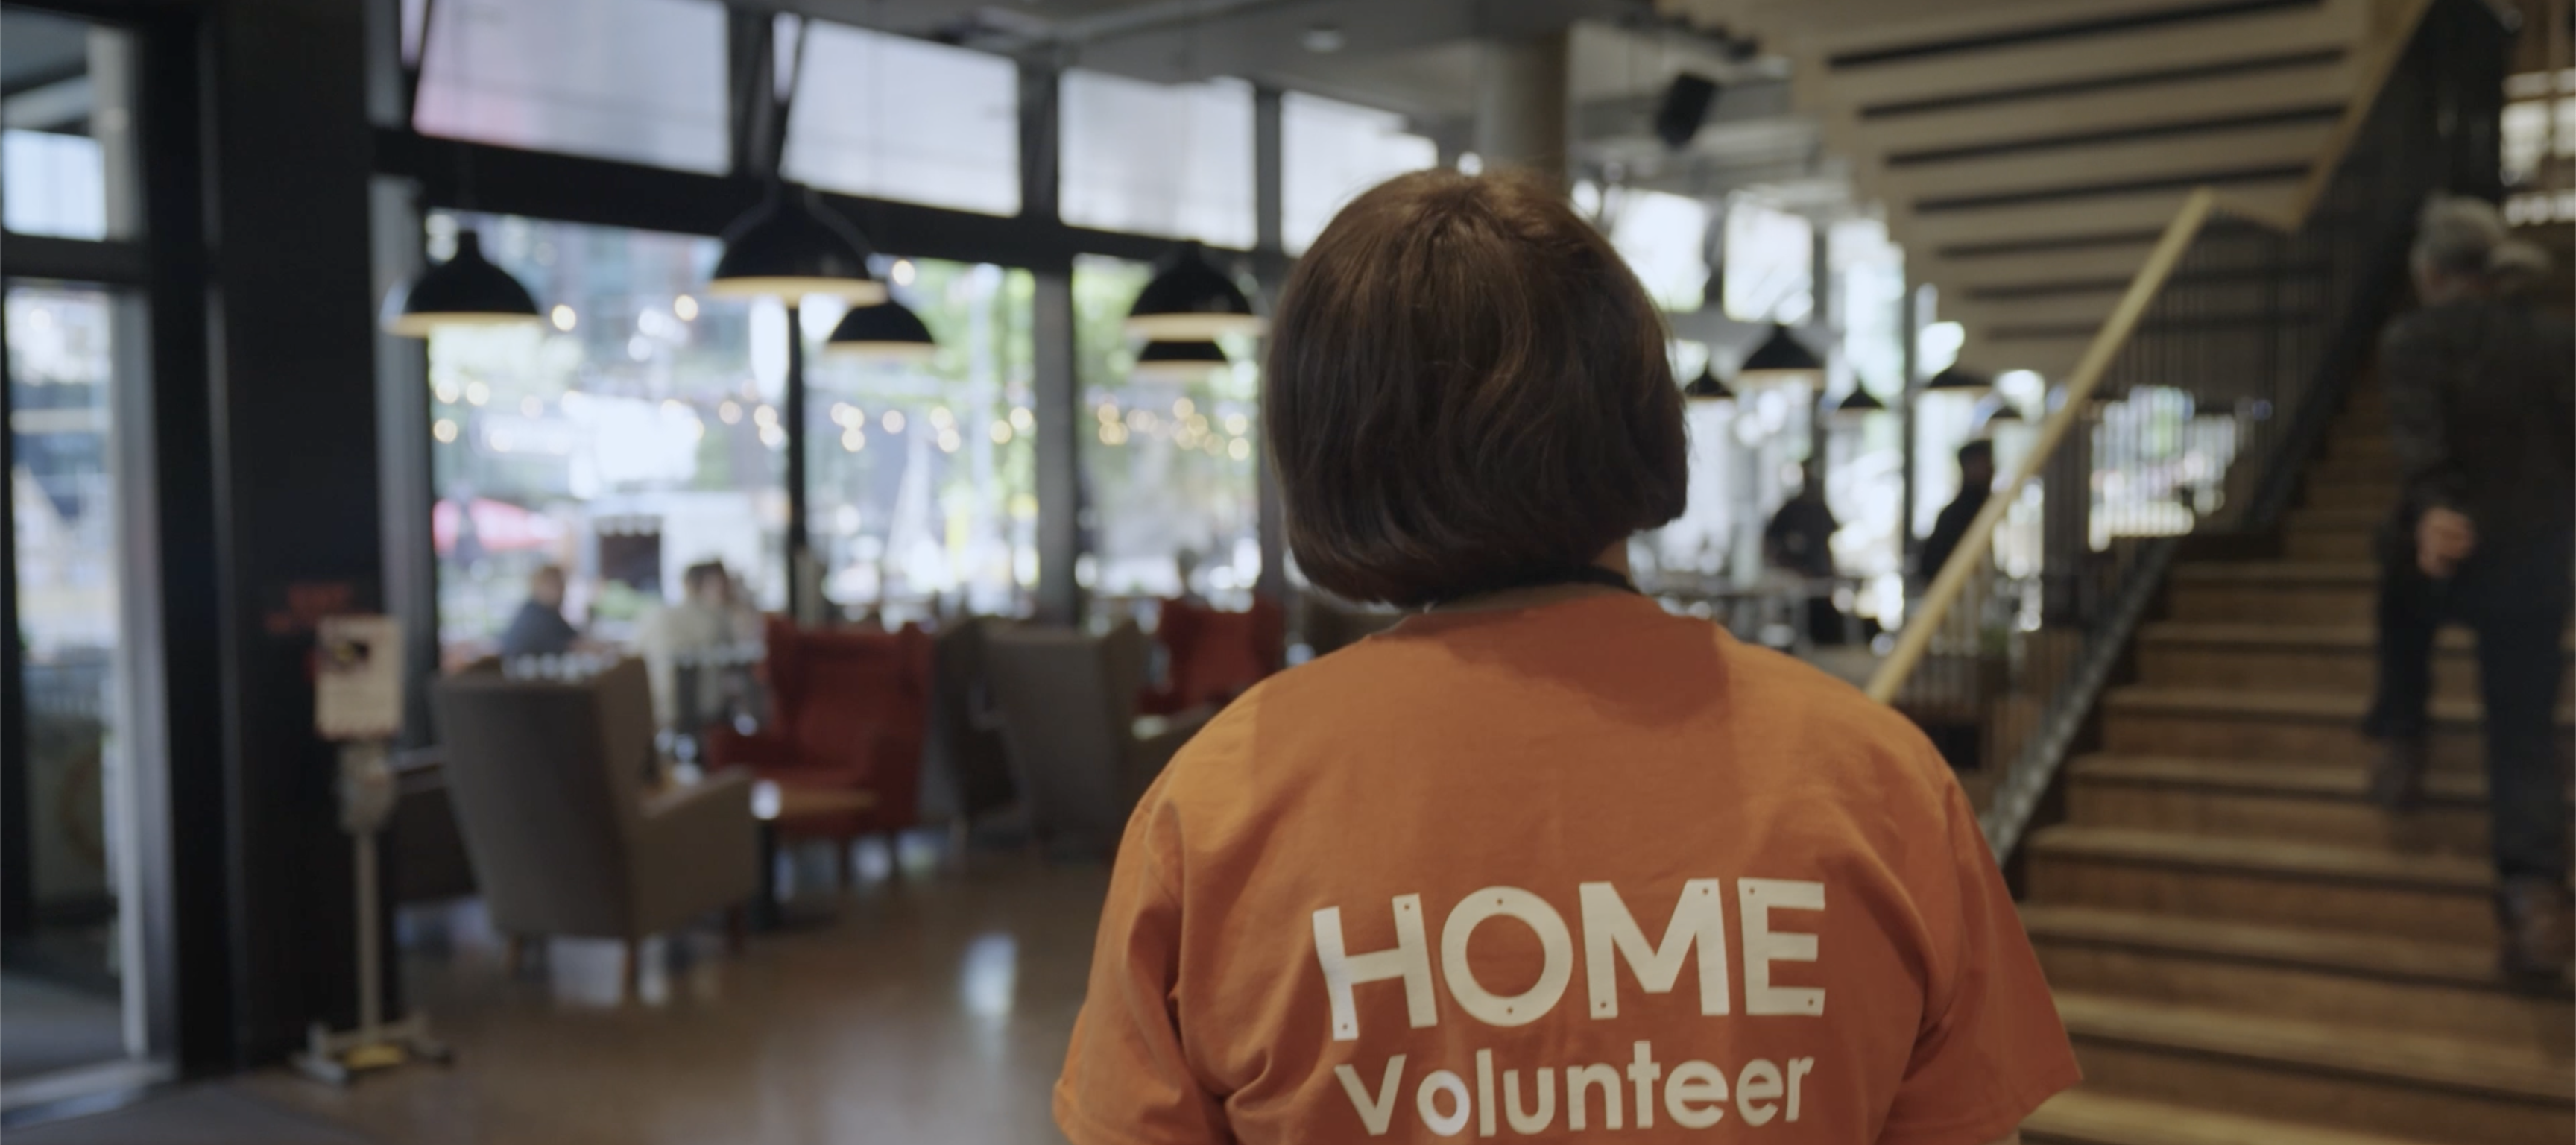 A young person in an orange T-shirt with HOME Volunteer written on it.